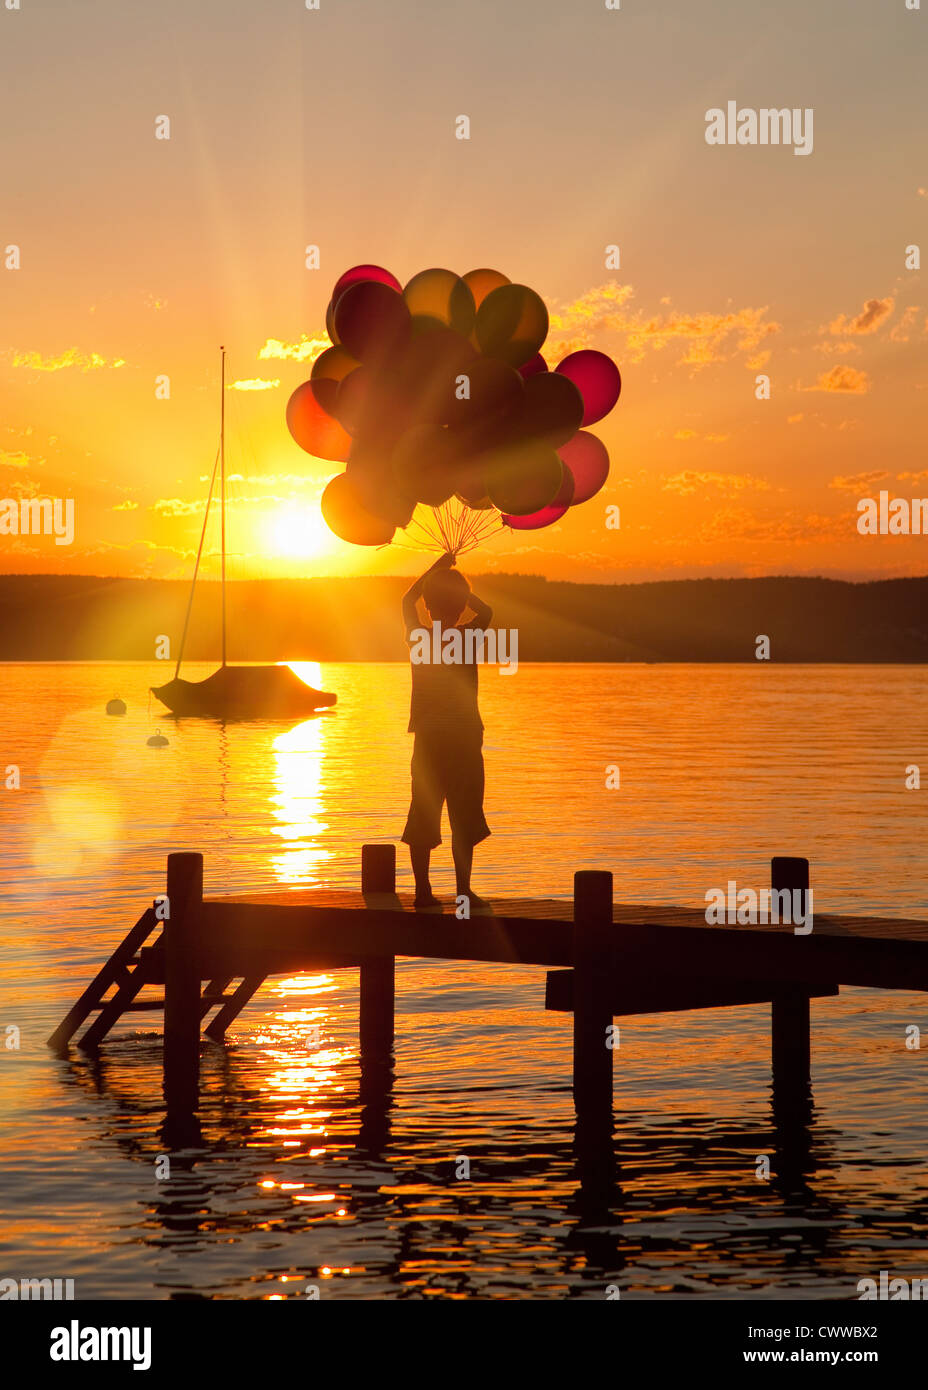 Boy holding balloons on wooden dock Banque D'Images